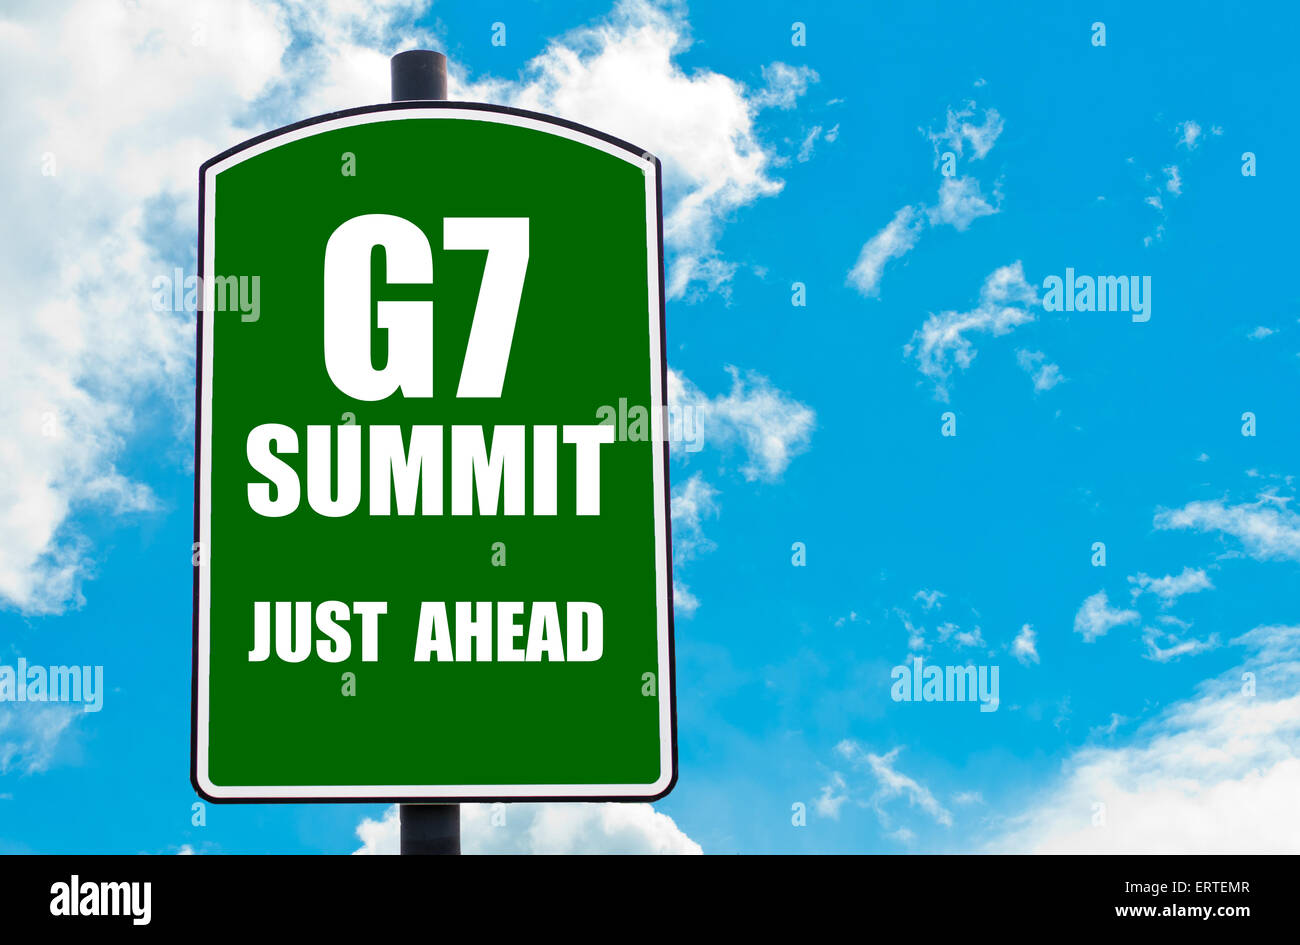 G7 SUMMIT Just Ahead written on green road sign  against clear blue sky background. Concept image with available copy space Stock Photo